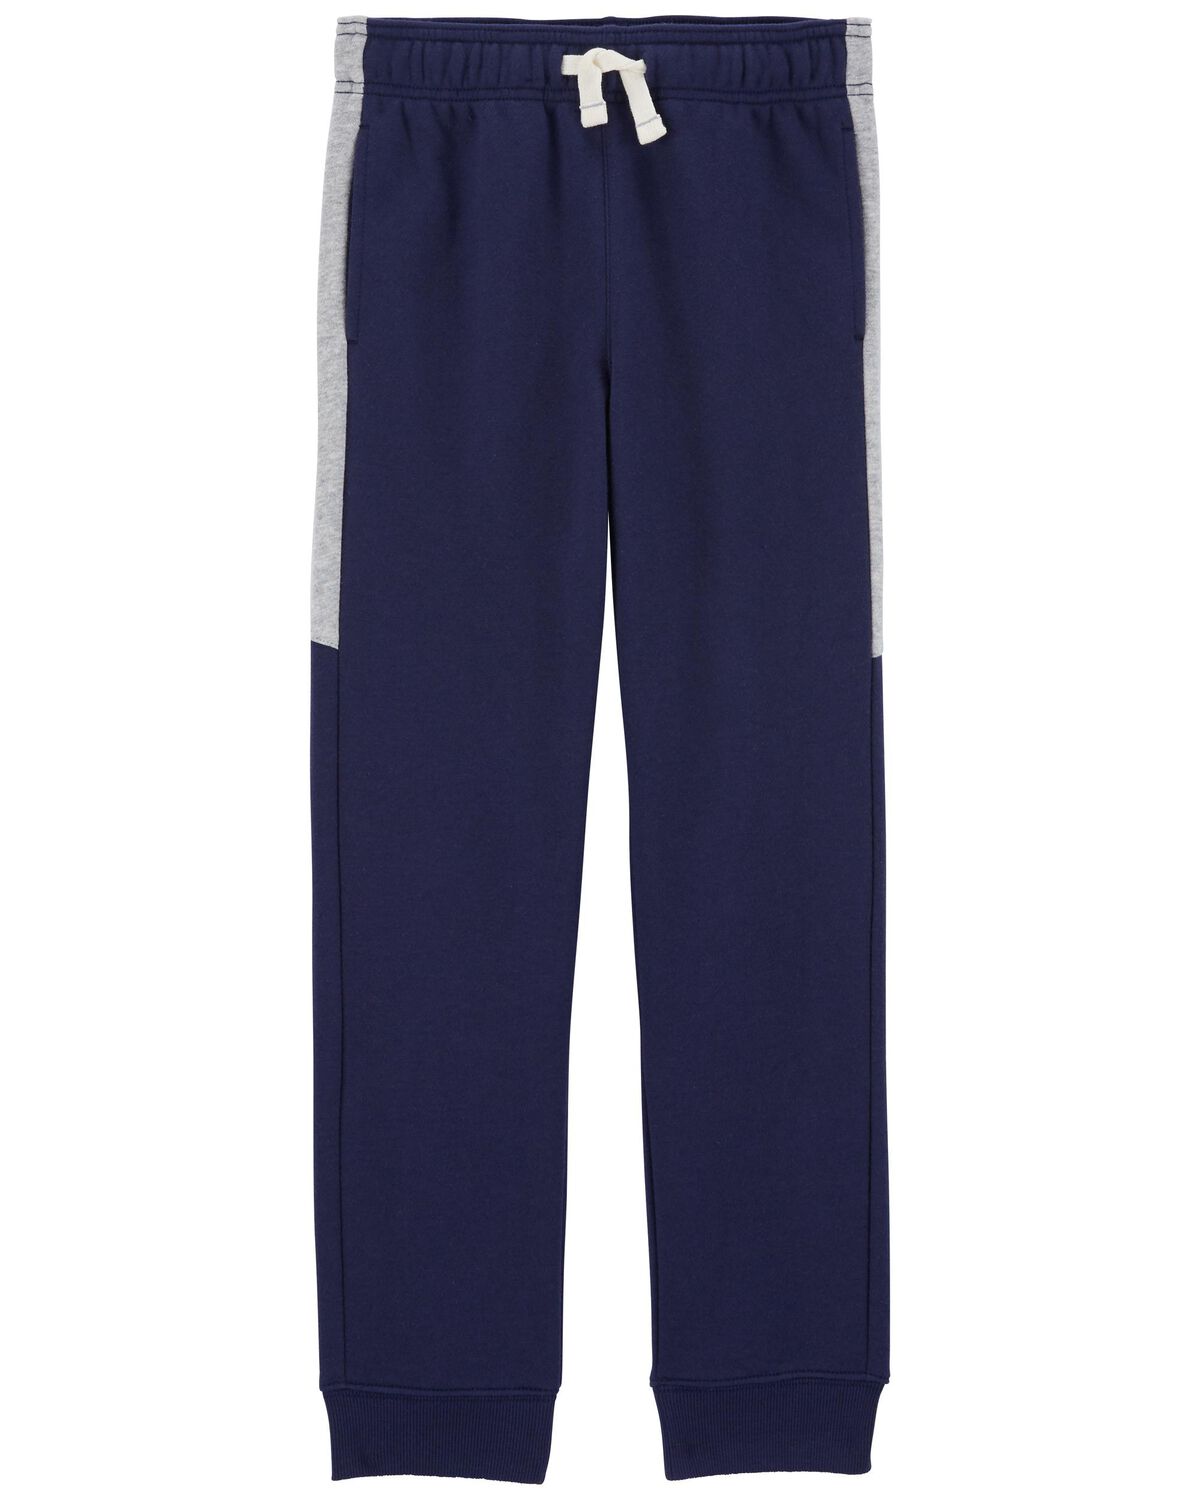 Navy Kid Pull-On Joggers | carters.com